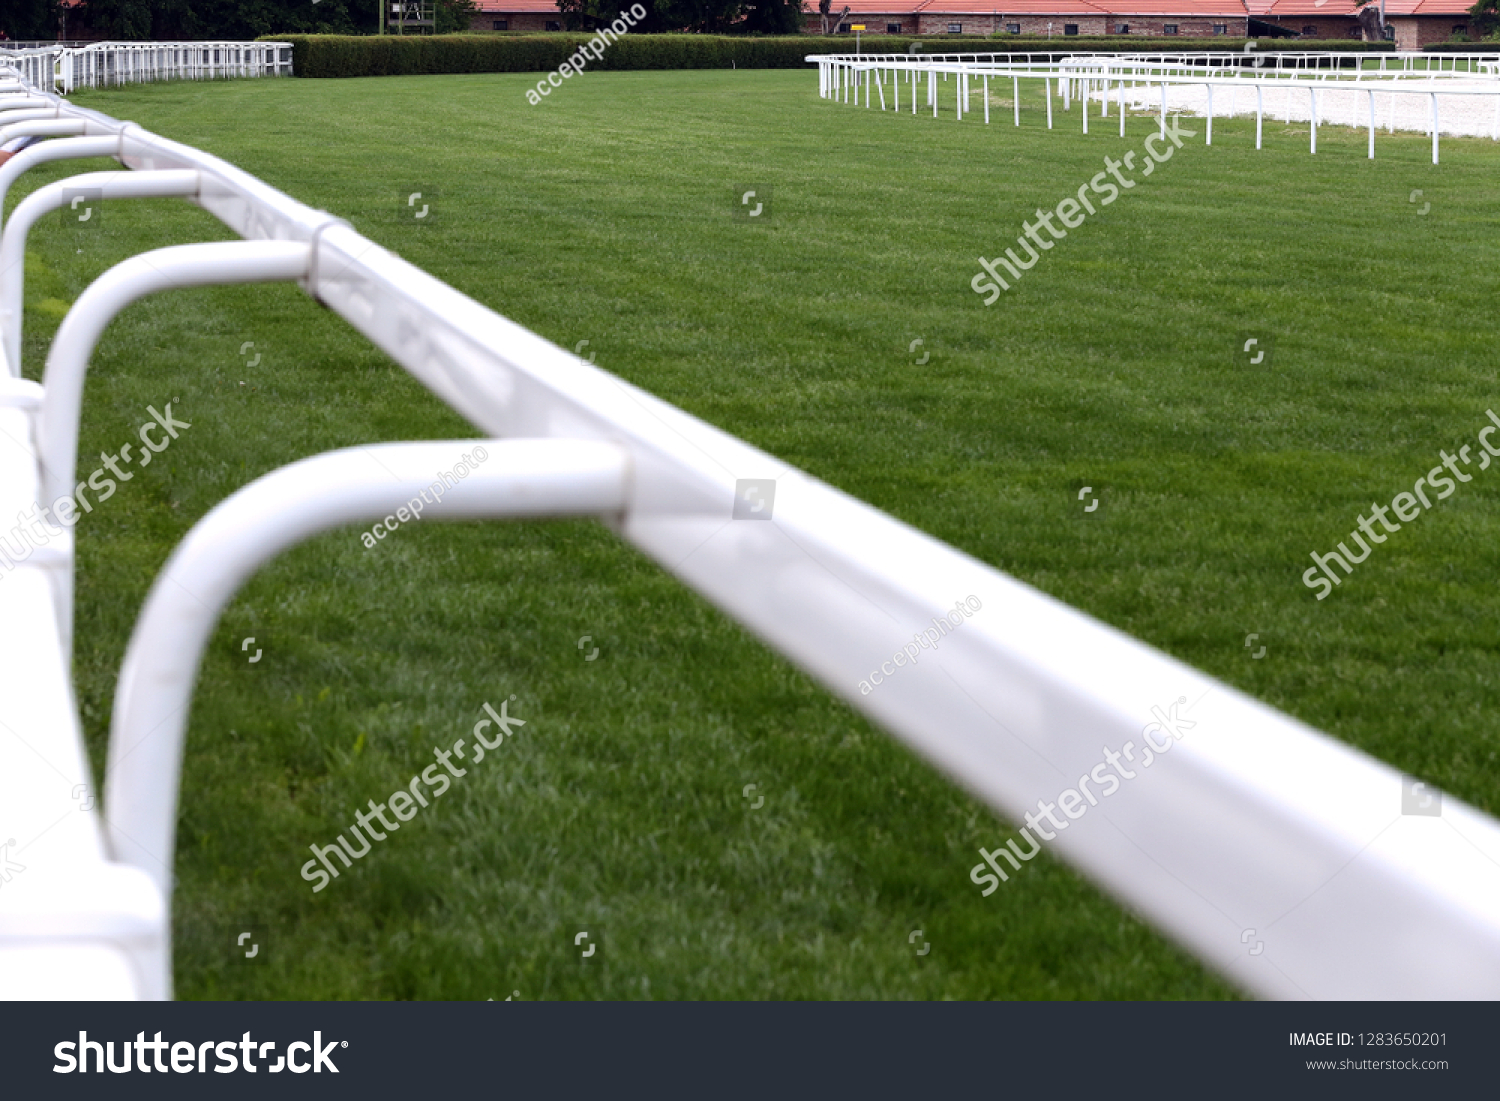 Treated green grass ready for gallop racing on the racing weekend
 #1283650201